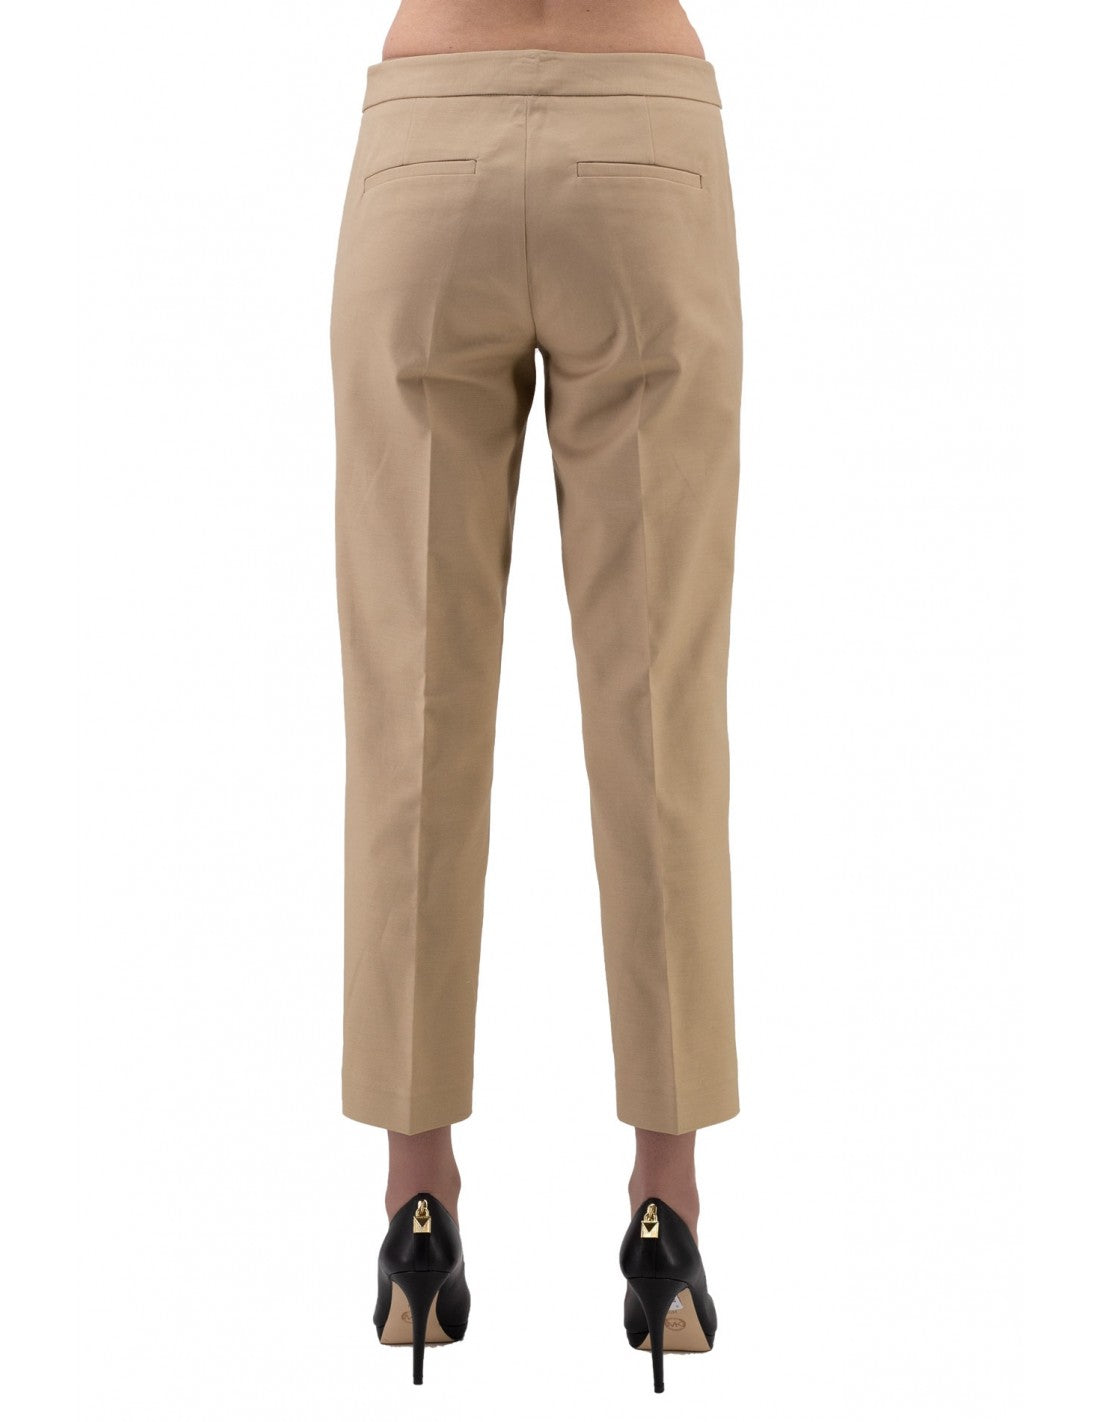 Women's trousers with side band